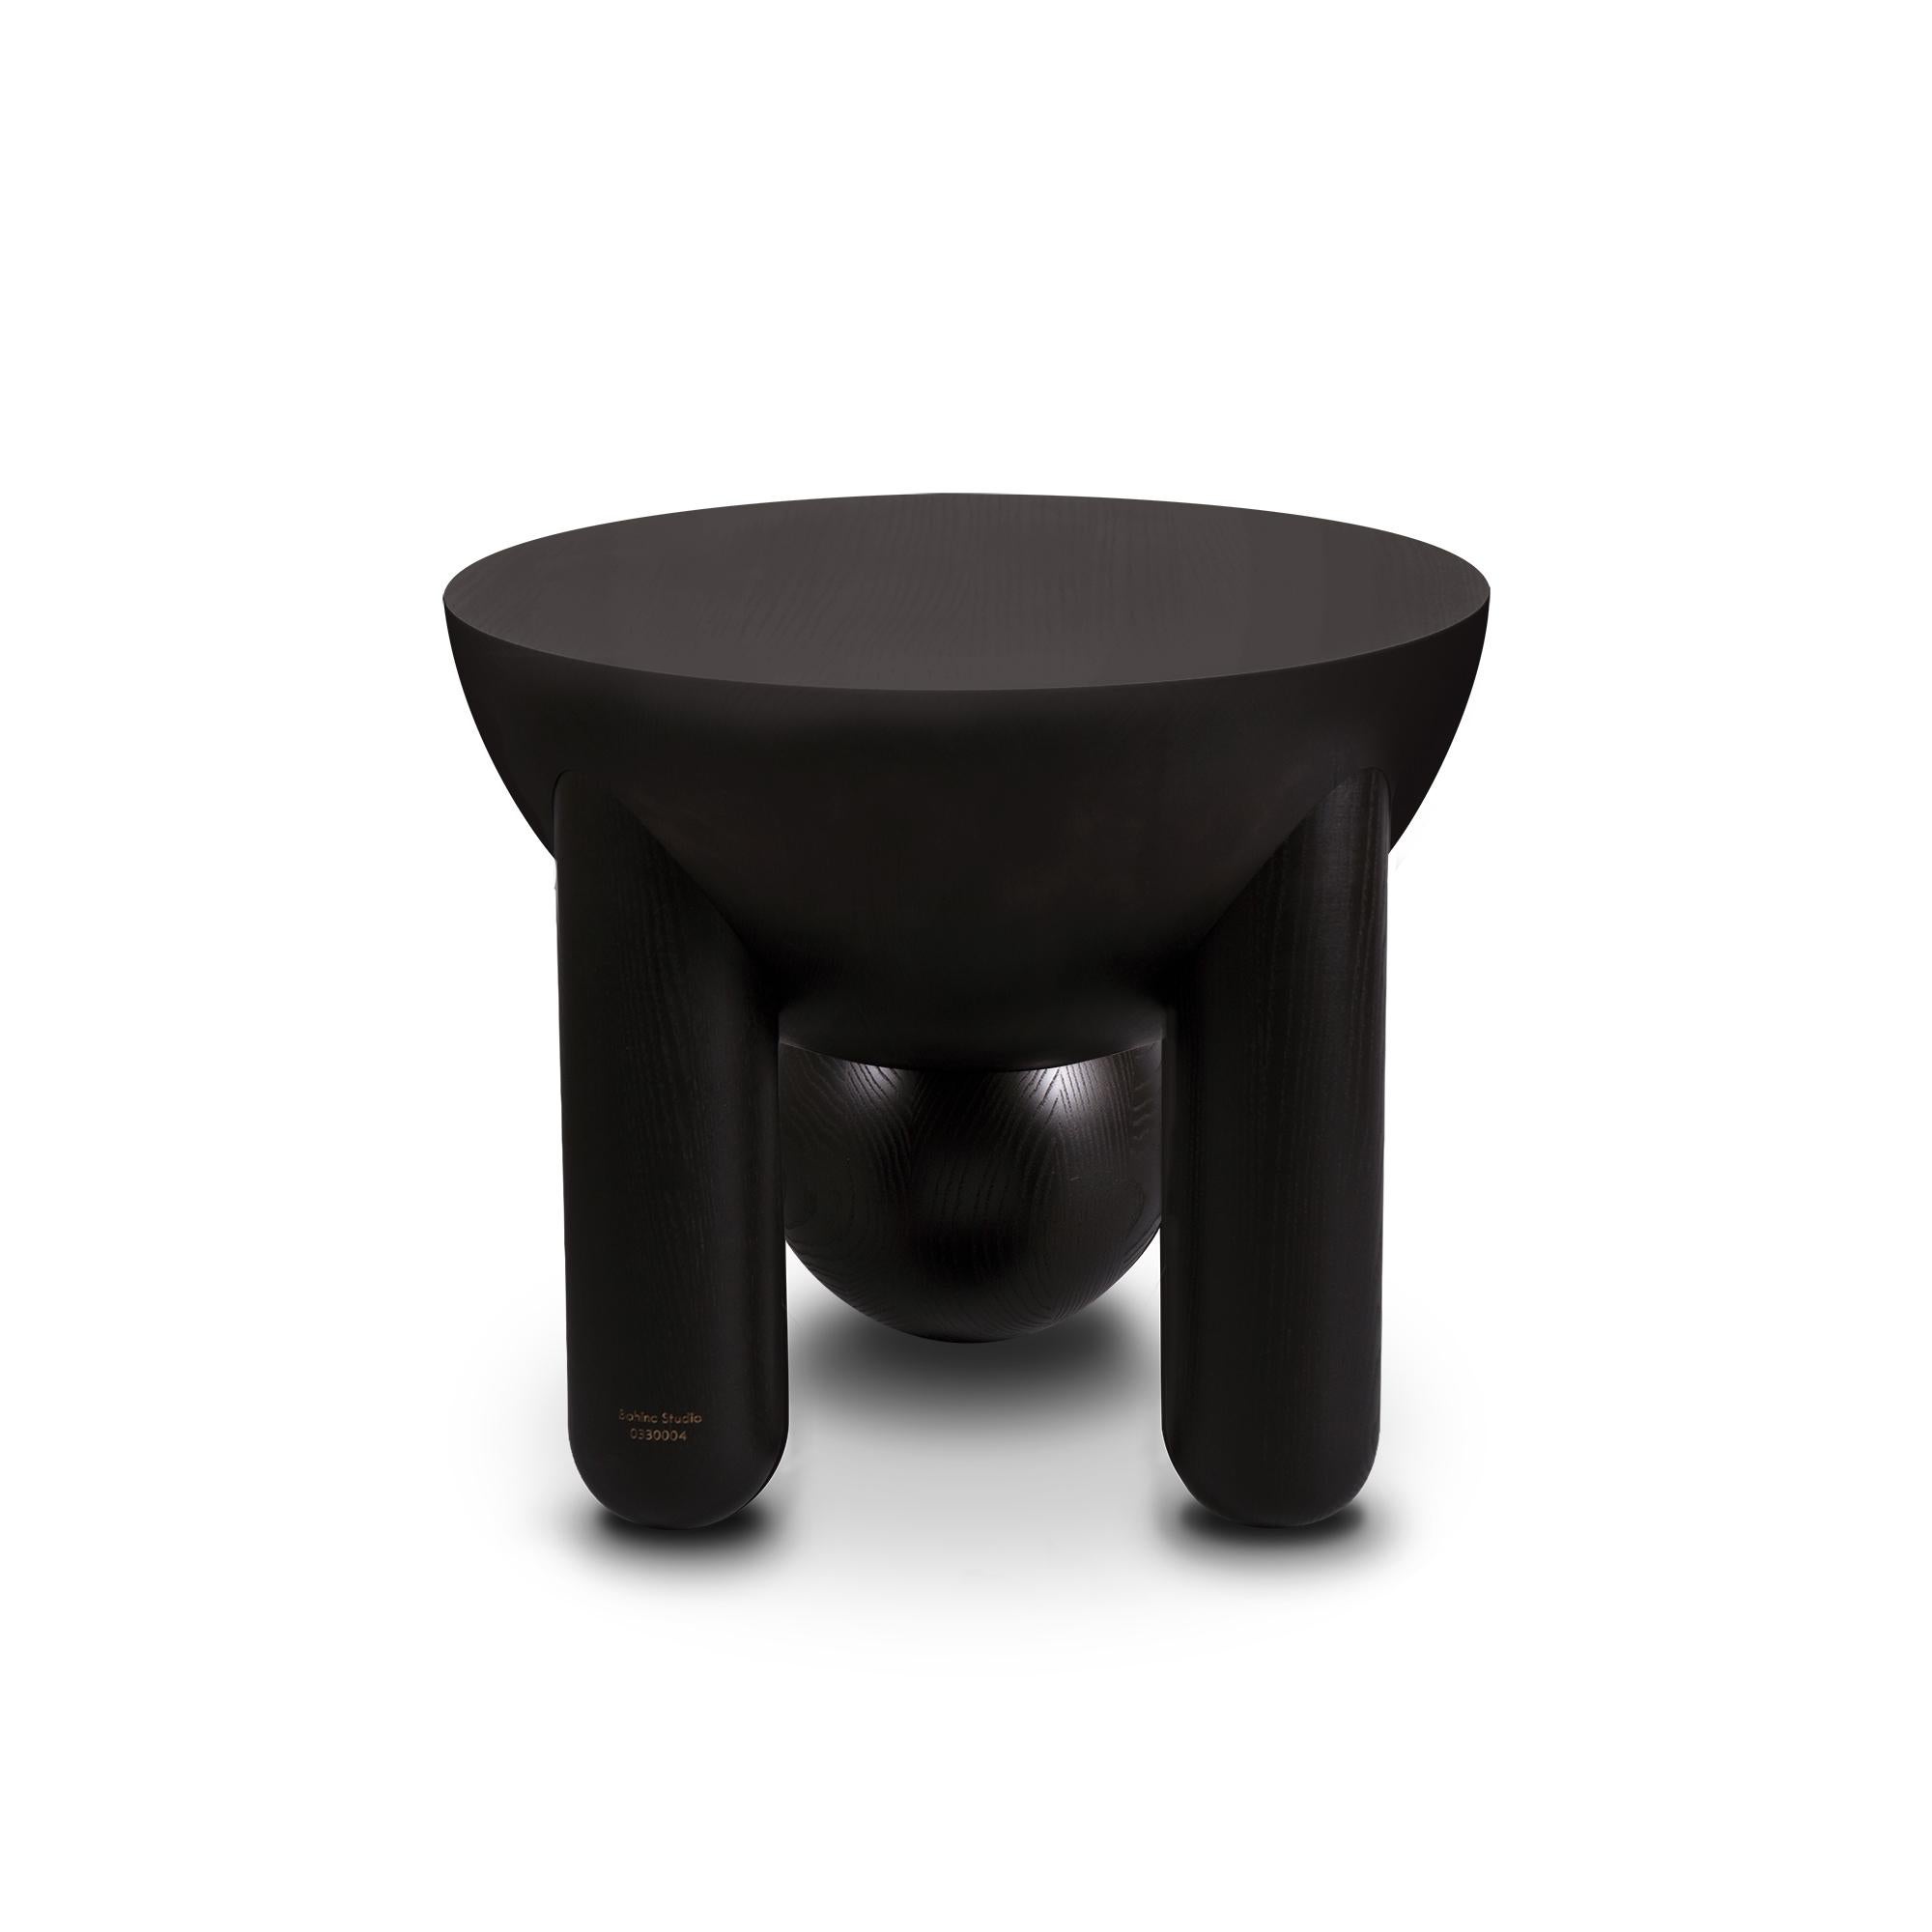 Profiterole small coffee table and Profiterole occasional table are in marble and wood respectively, supported by round dessert-like spheres and semi-cupped legs which support a rounded top. The coffee table comes in nero marquina or white carrara